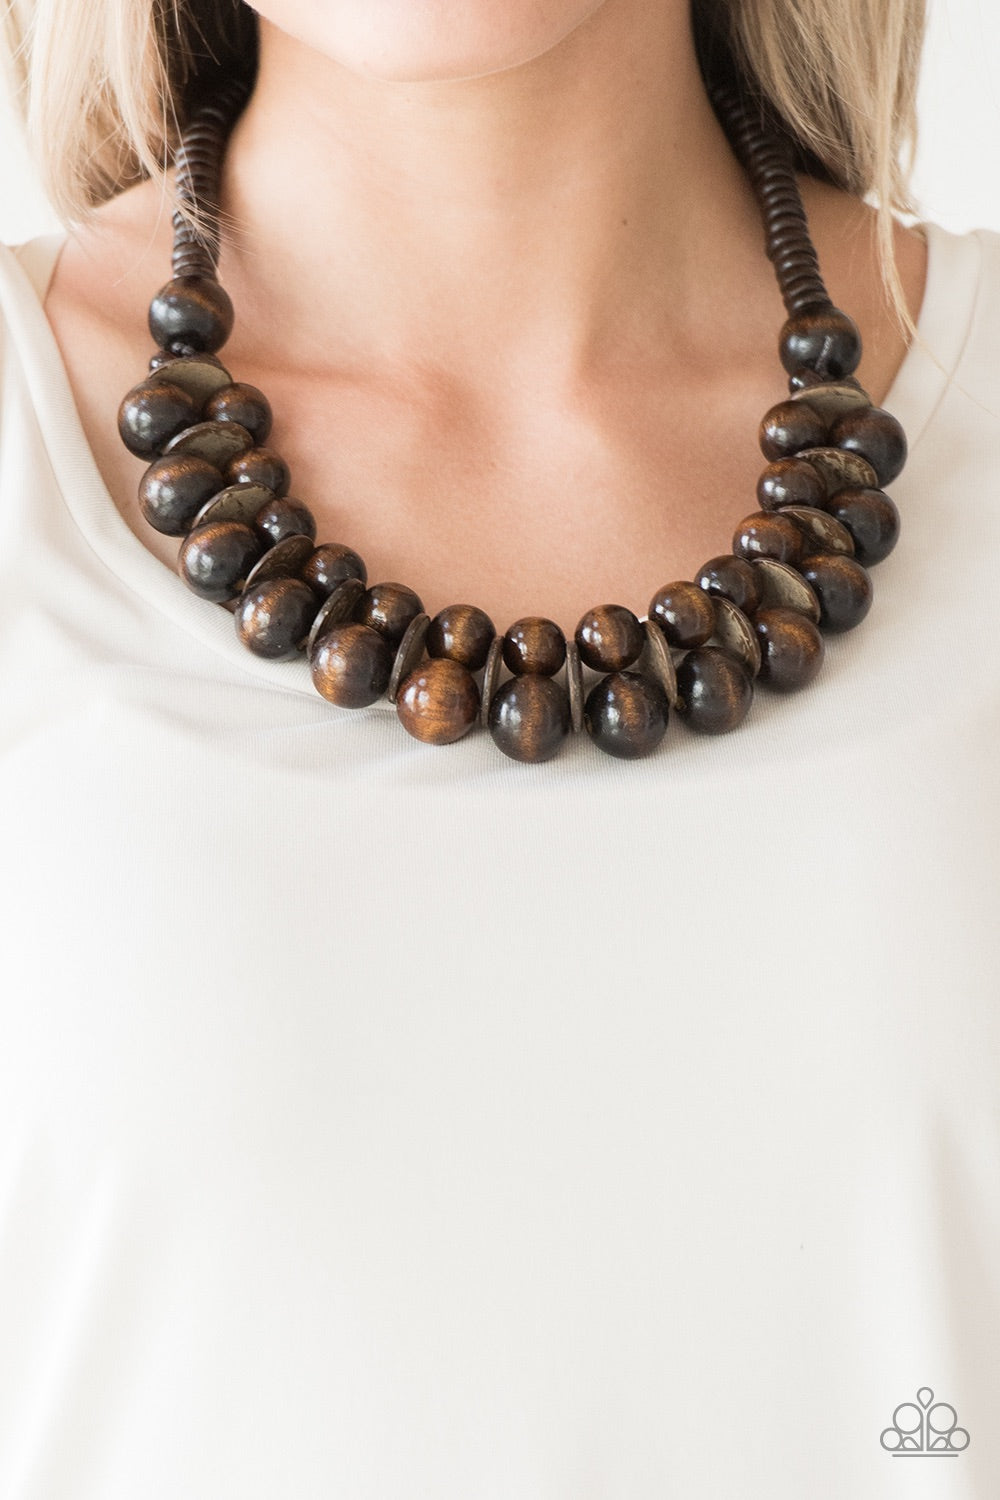 Paparazzi Jewelry Necklace Caribbean Cover Girl - Brown